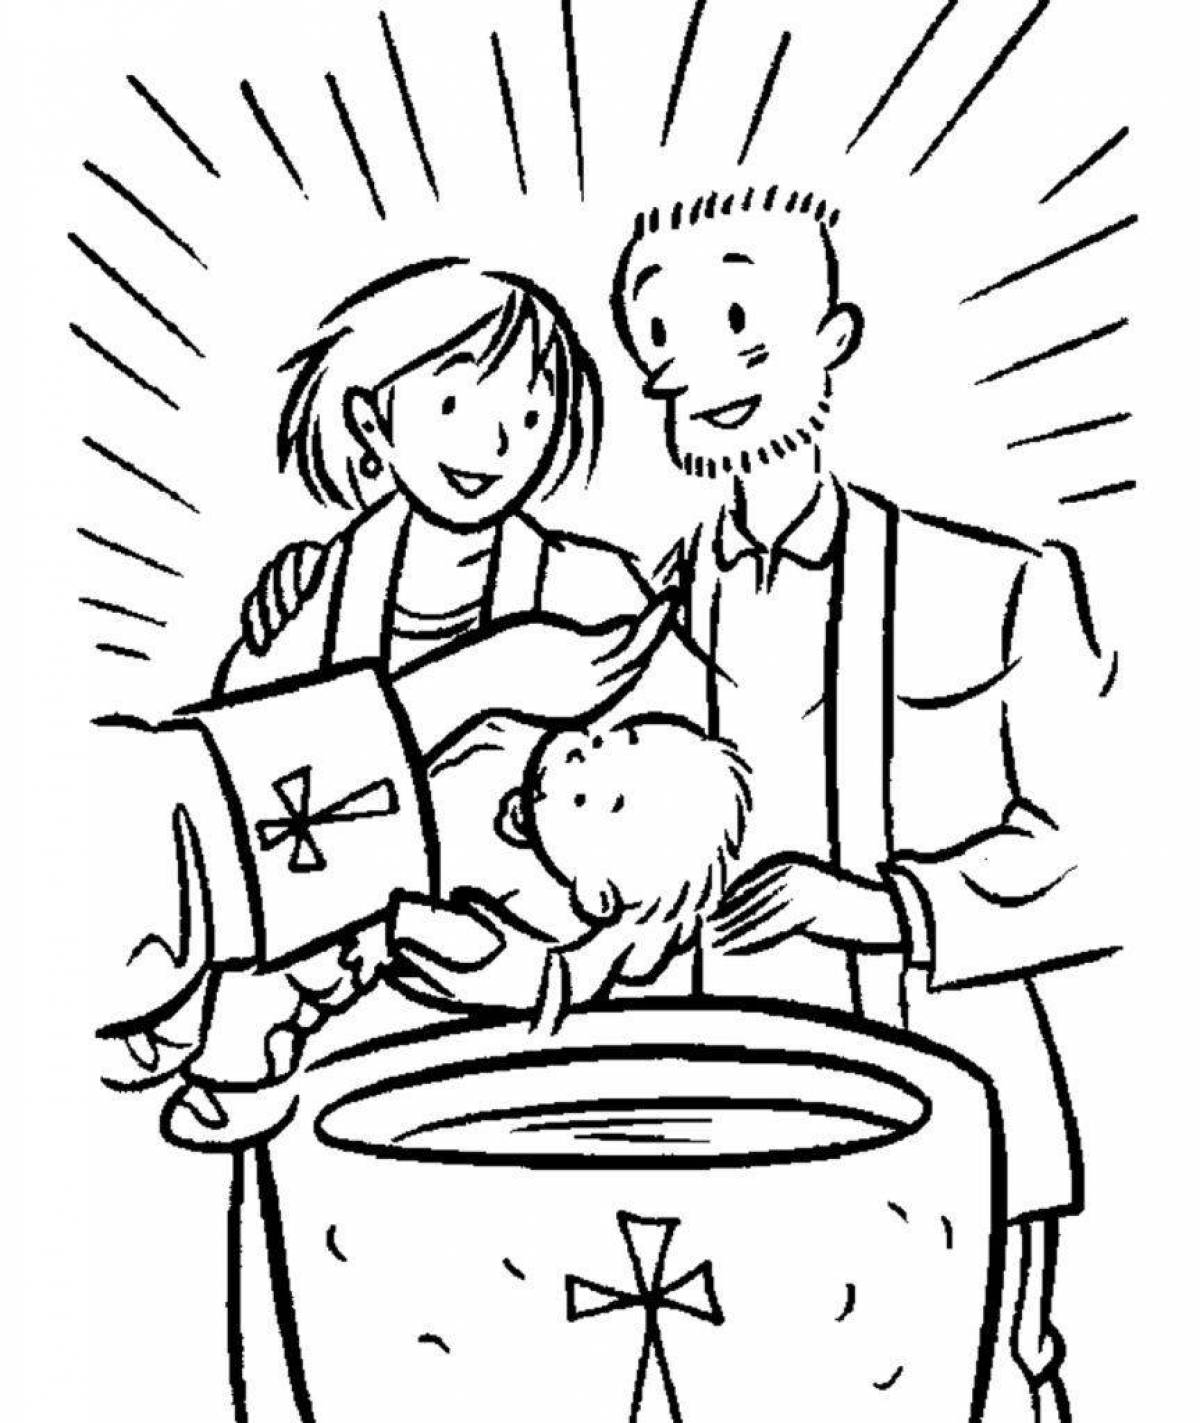 Glorious epiphany coloring page